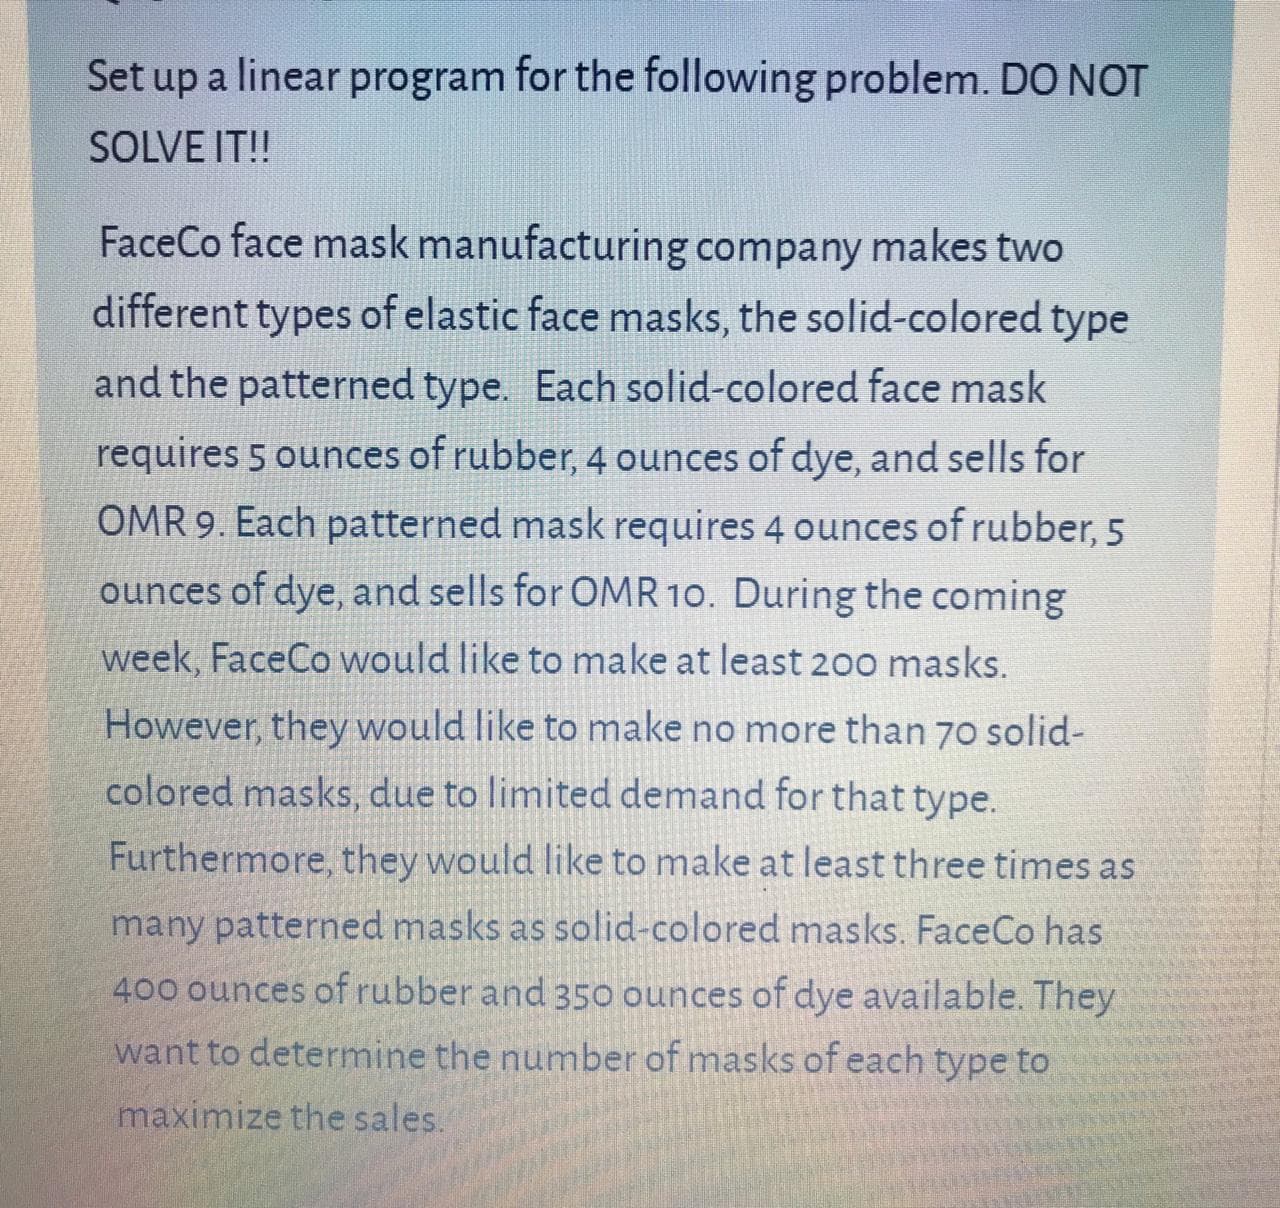 Set up a linear program for the following problem. DO NOT
SOLVE IT!
FaceCo face mask manufacturing company makes two
different types of elastic face masks, the solid-colored type
and the patterned type. Each solid-colored face mask
requires 5 ounces of rubber, 4 ounces of dye, and sells for
OMR 9. Each patterned mask requires 4 ounces of rubber, 5
ounces of dye, and sells for OMR 10. During the coming
week, FaceCo would like to make at least 20o masks.
However, they would like to make no more than 70 solid-
colored masks, due to limited demand for that type.
Furthermore, they would like to make at least three times as
many patterned masks as solid-colored masks. FaceCo has
400 ounces of rubber and 350 ounces of dye available. They
want to determine the number of masks of each type to
maximize the sales.
